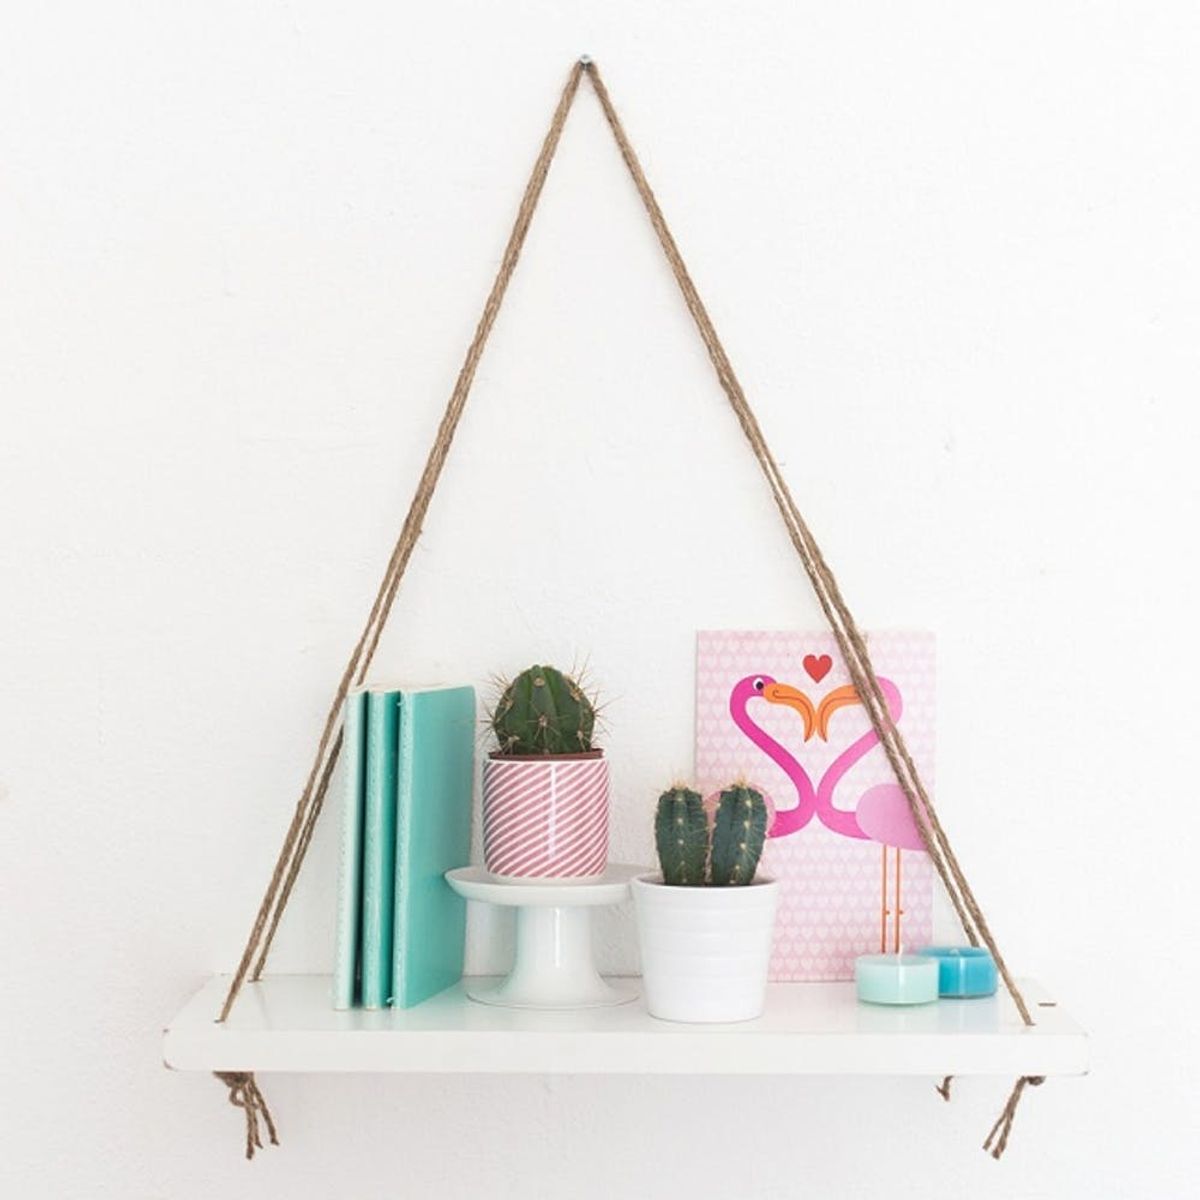 Follow These 4 Easy Steps and Make This Anthro-Inspired Swing Shelf